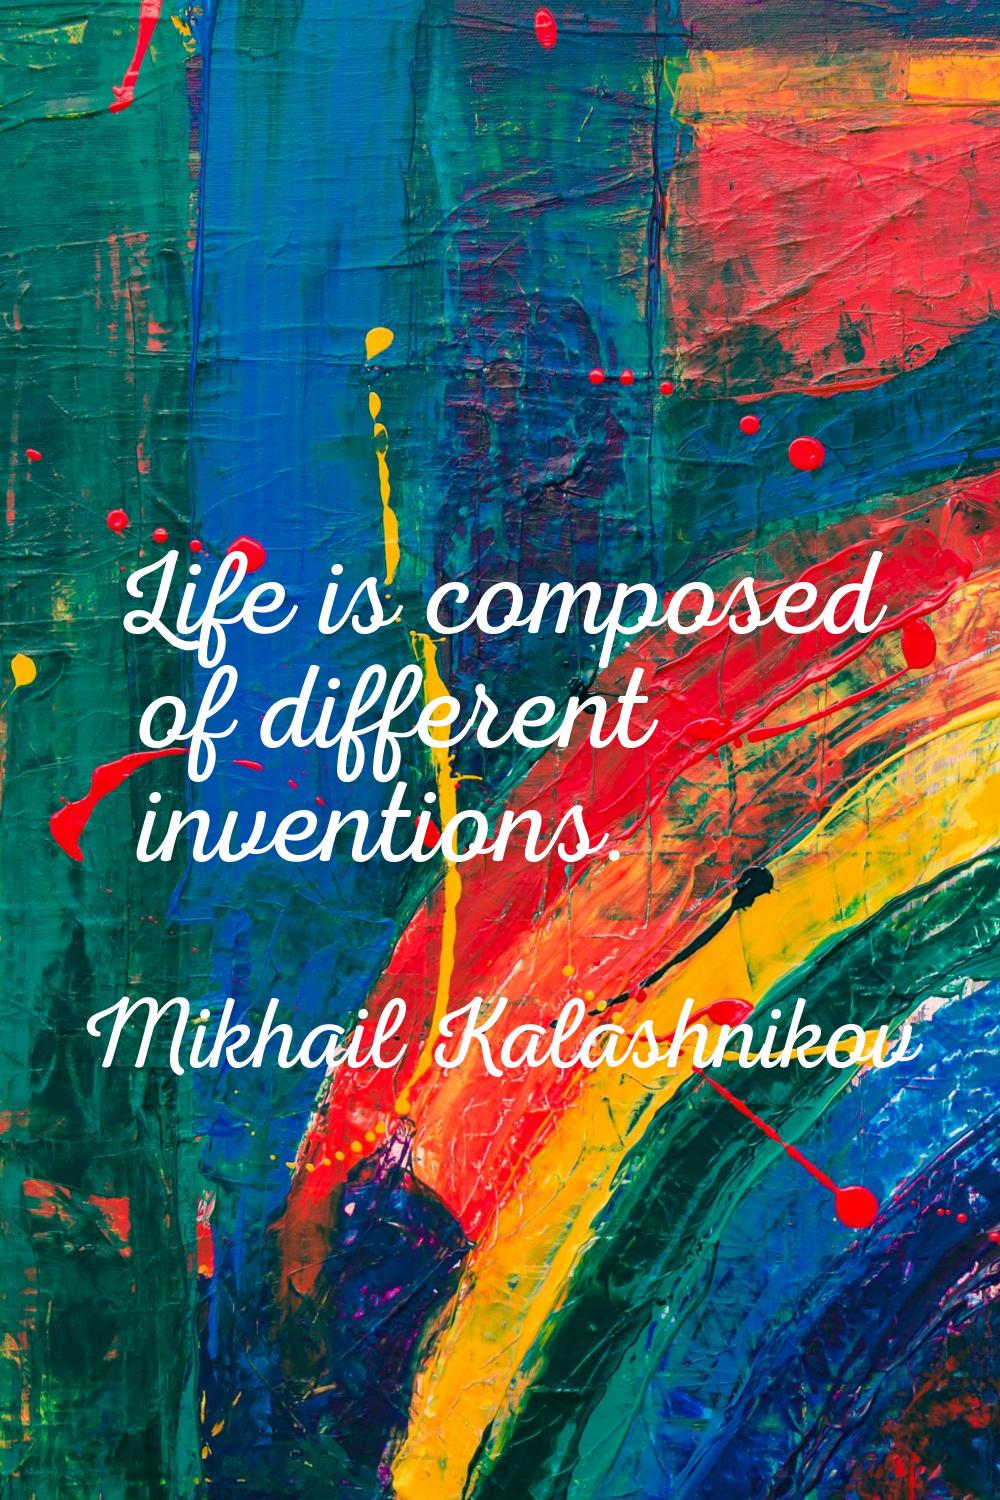 Life is composed of different inventions.